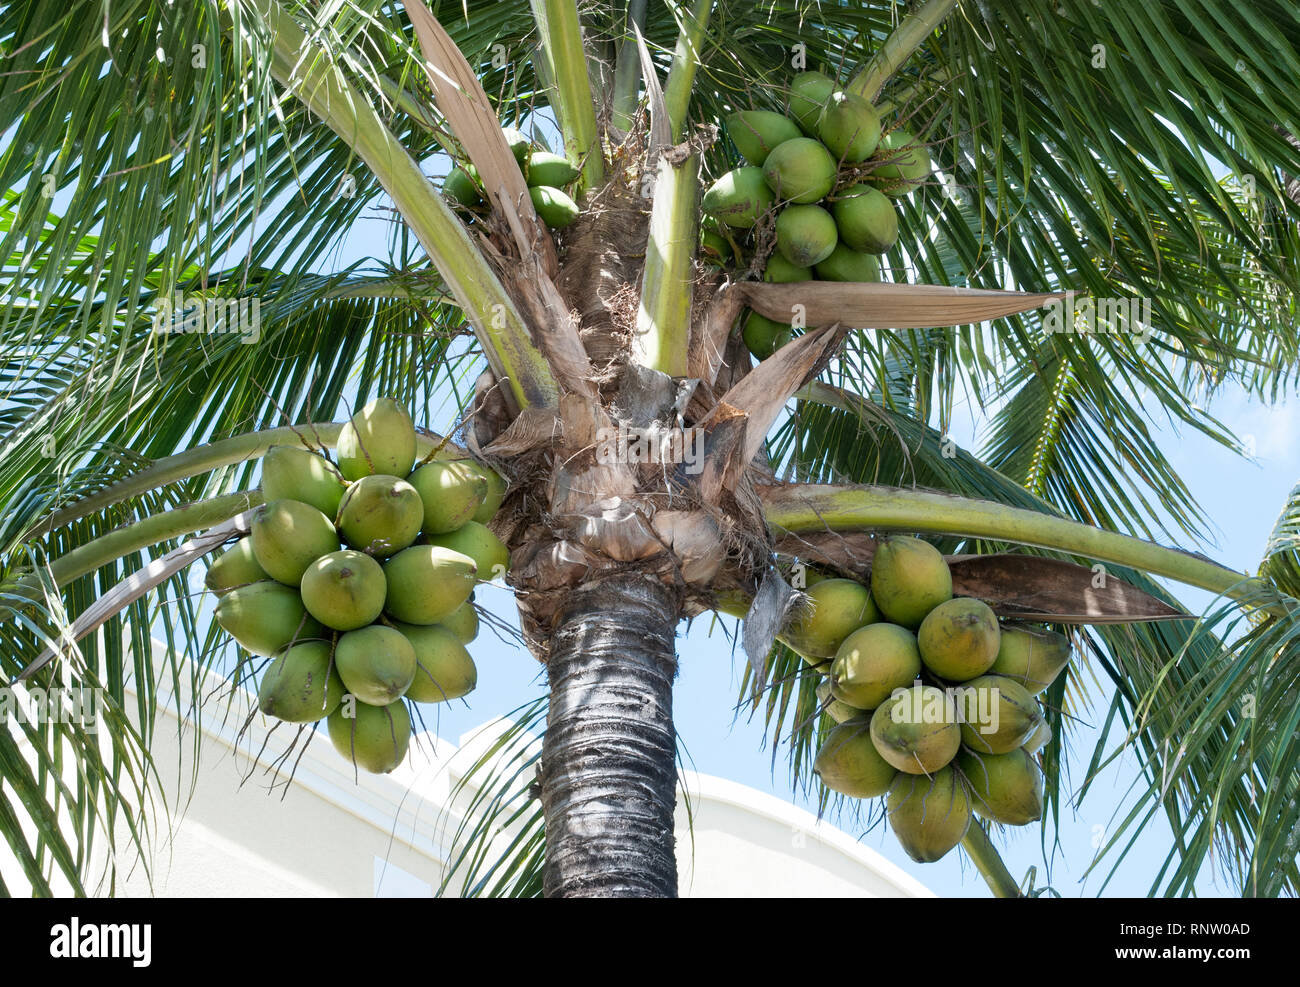 The close view of palm tree coconuts in Nassau downtown (Bahamas). Stock Photo